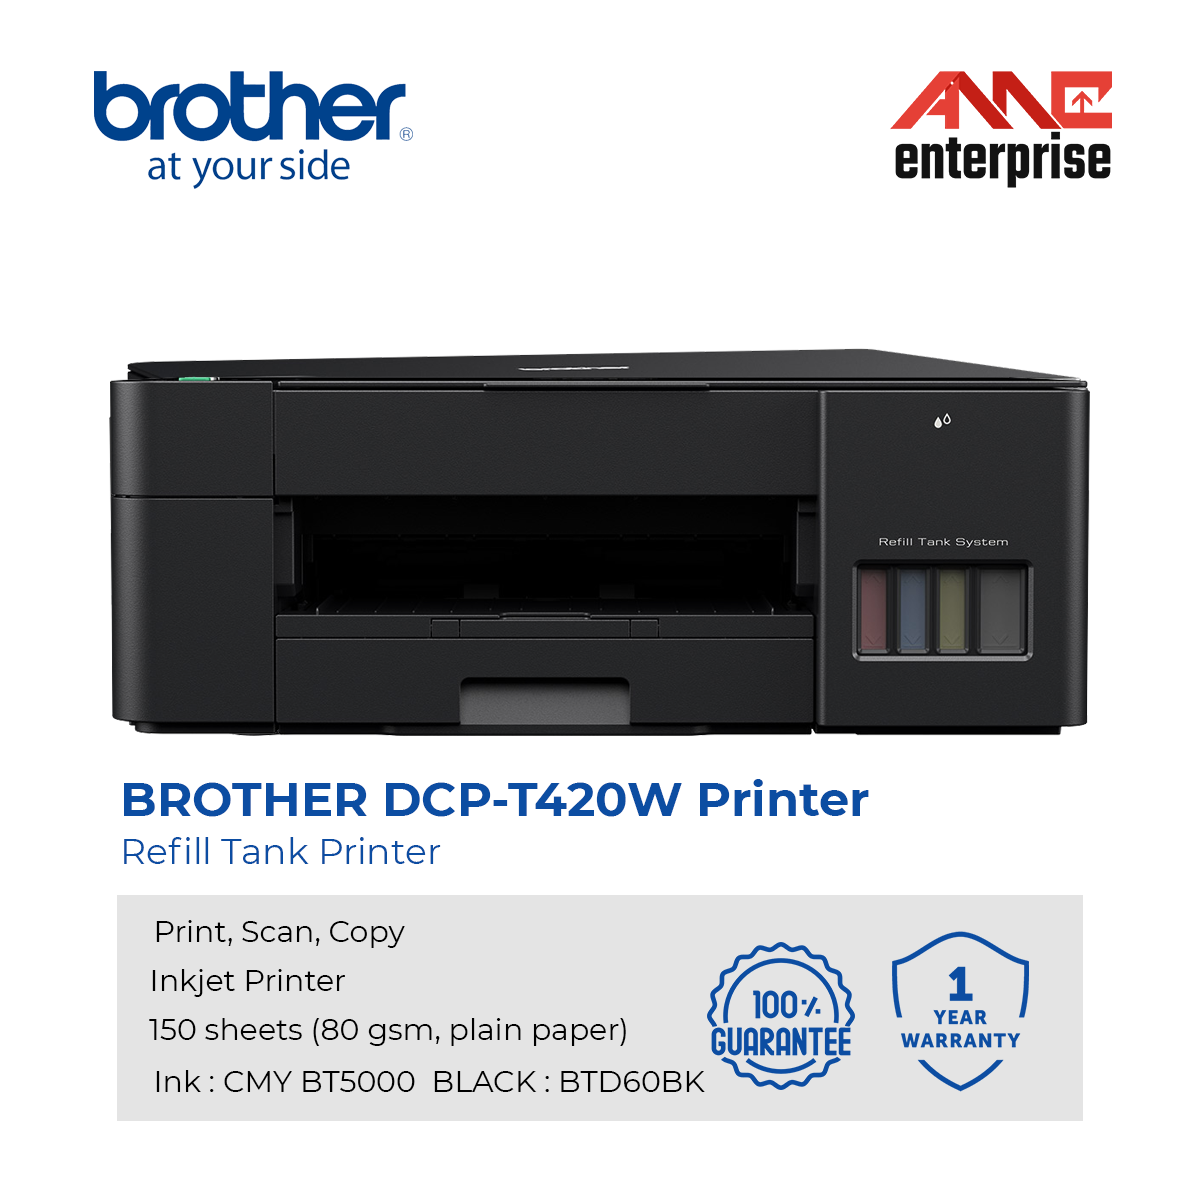 Brother DCP-T420W Refill Tank Printer (2)